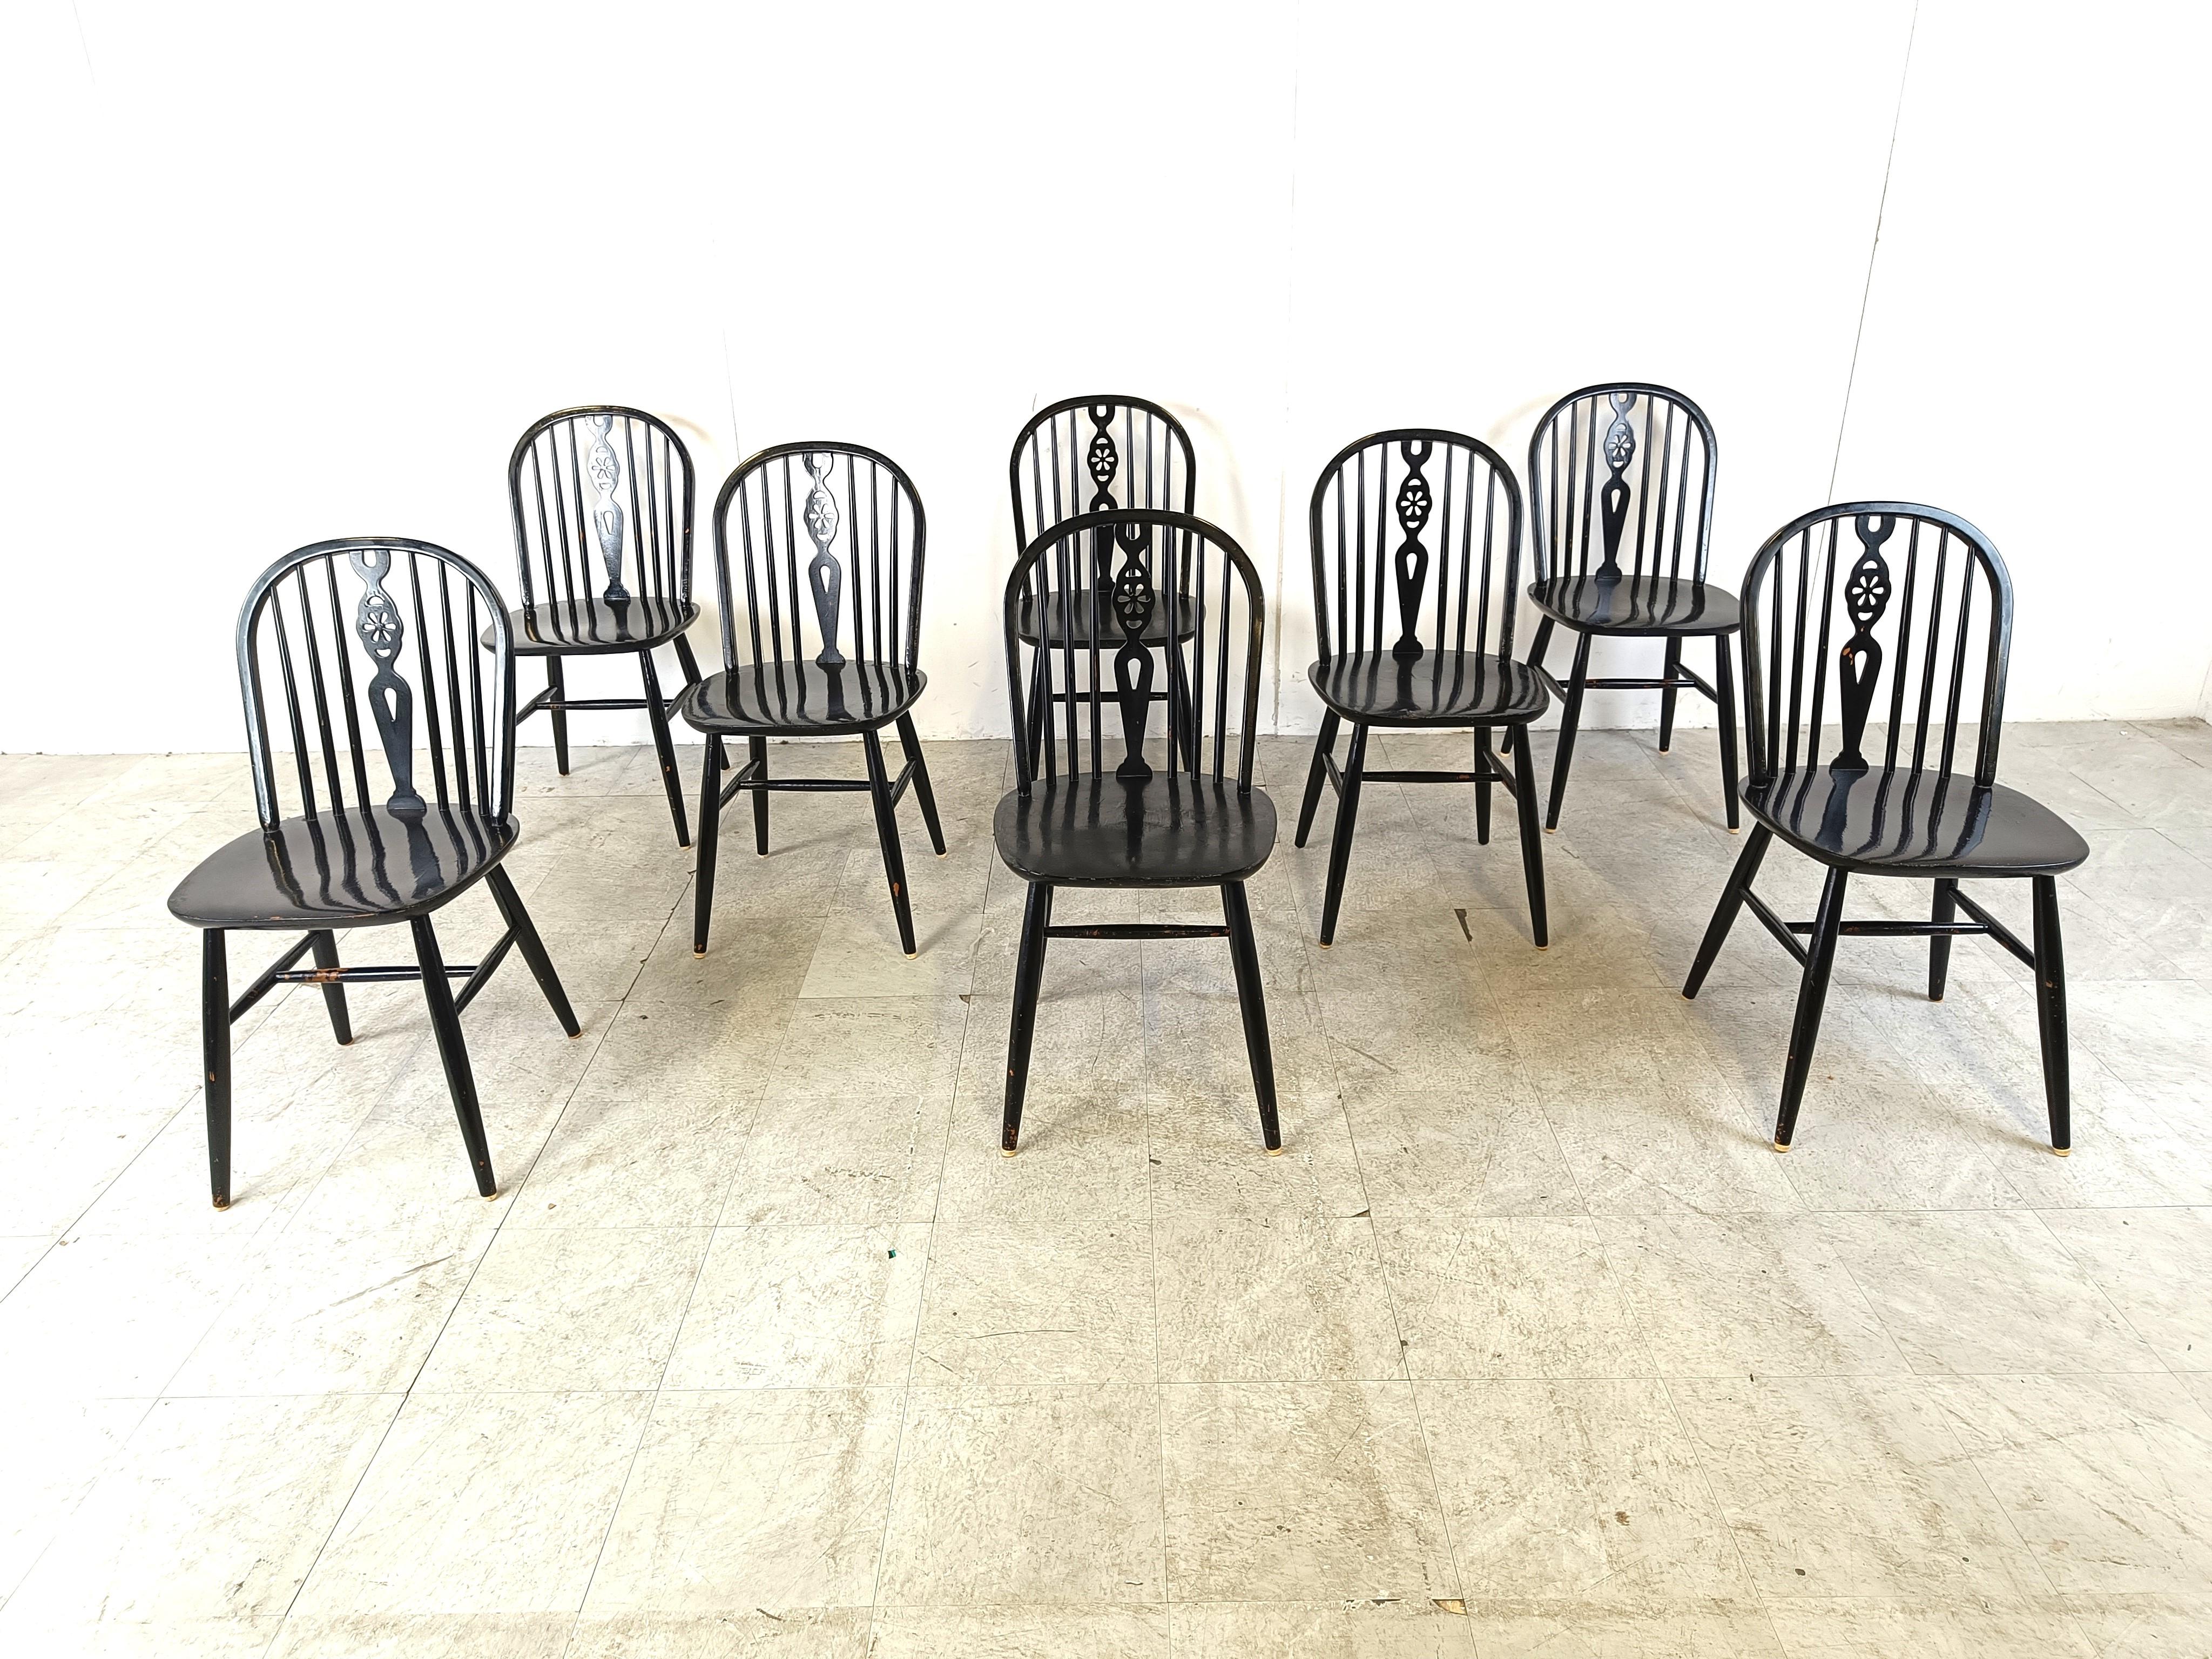 Set of 8 spindle back ercol dining chairs.

The chairs are beautifully crafted with an eye for details and are made of ebonized wooden frames.

Timeless pieces that gives an antique/vintage touch to your interior which mixes well with modern day